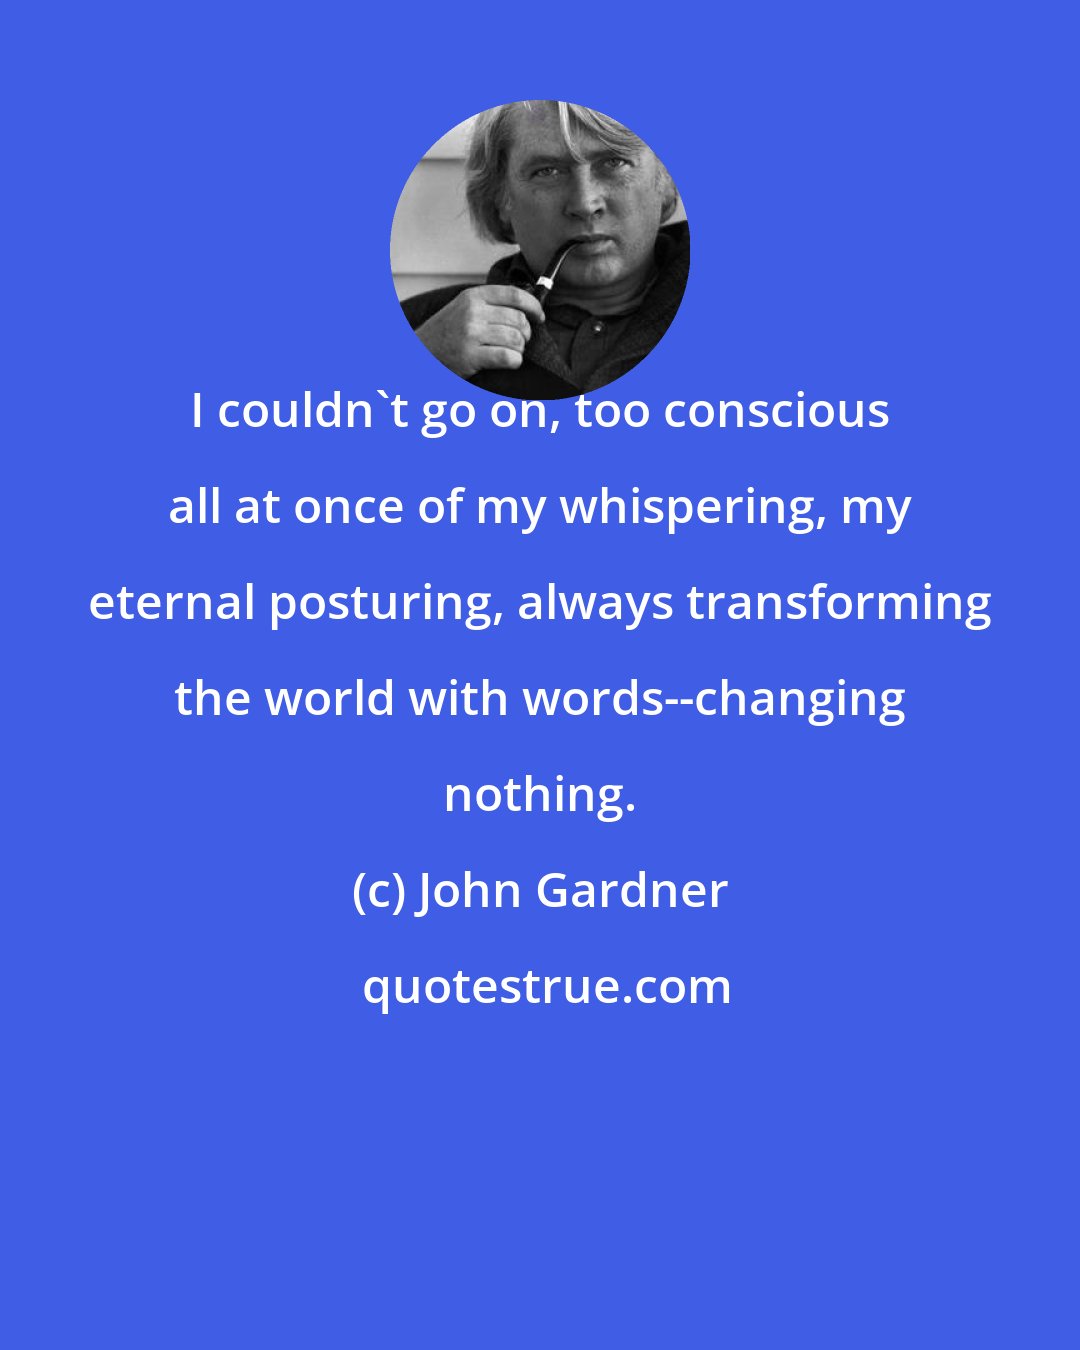 John Gardner: I couldn't go on, too conscious all at once of my whispering, my eternal posturing, always transforming the world with words--changing nothing.